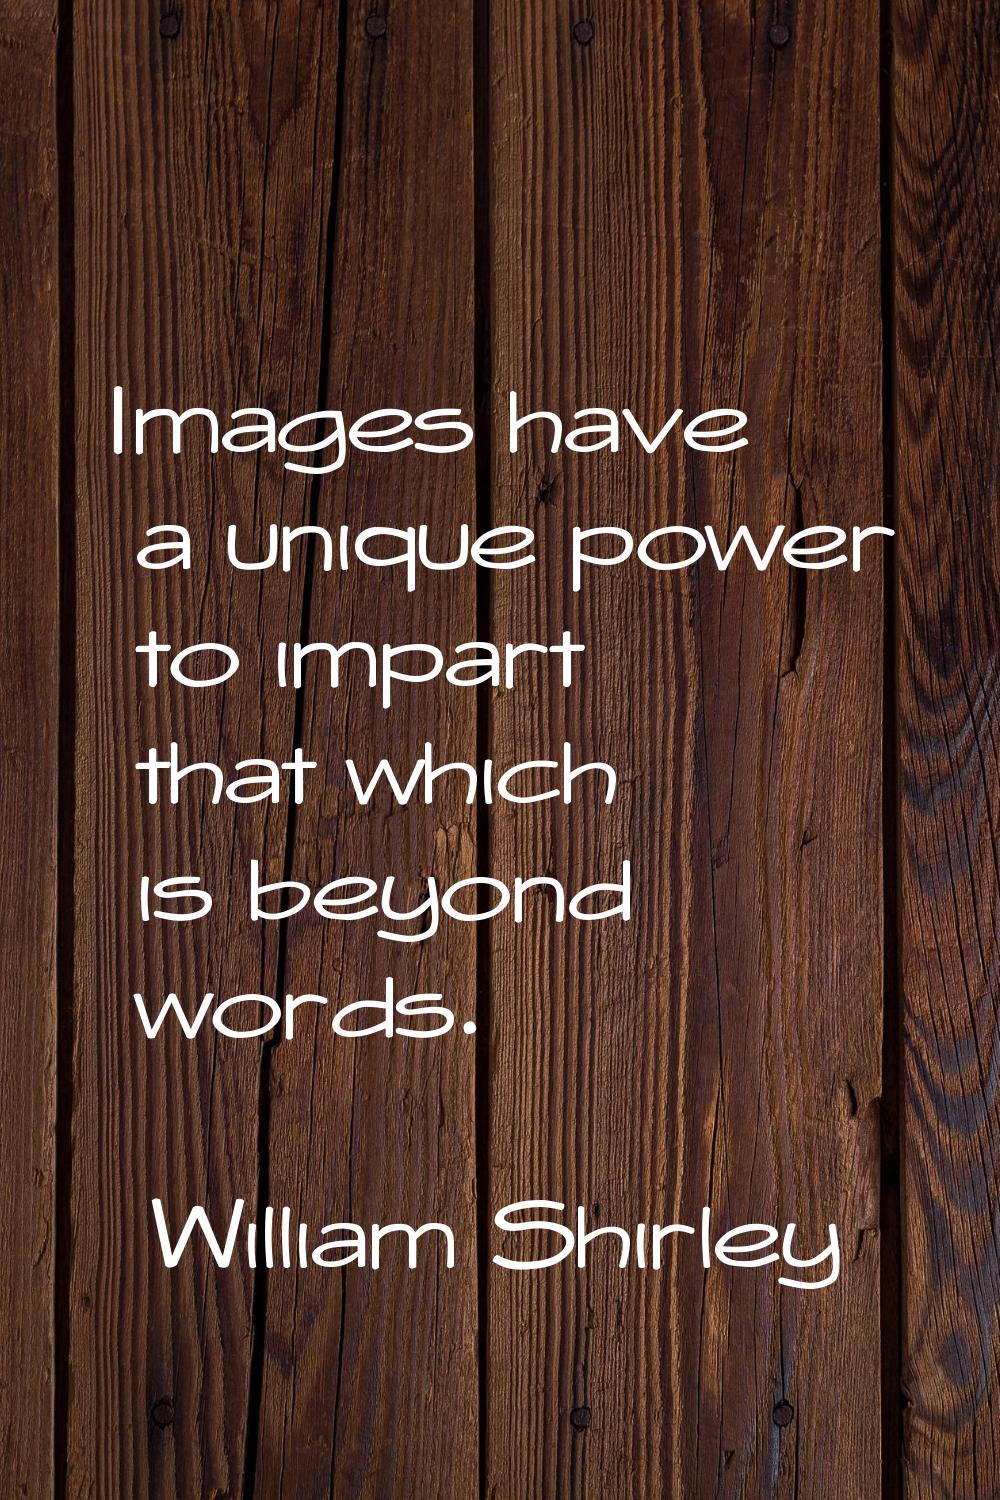 Images have a unique power to impart that which is beyond words.